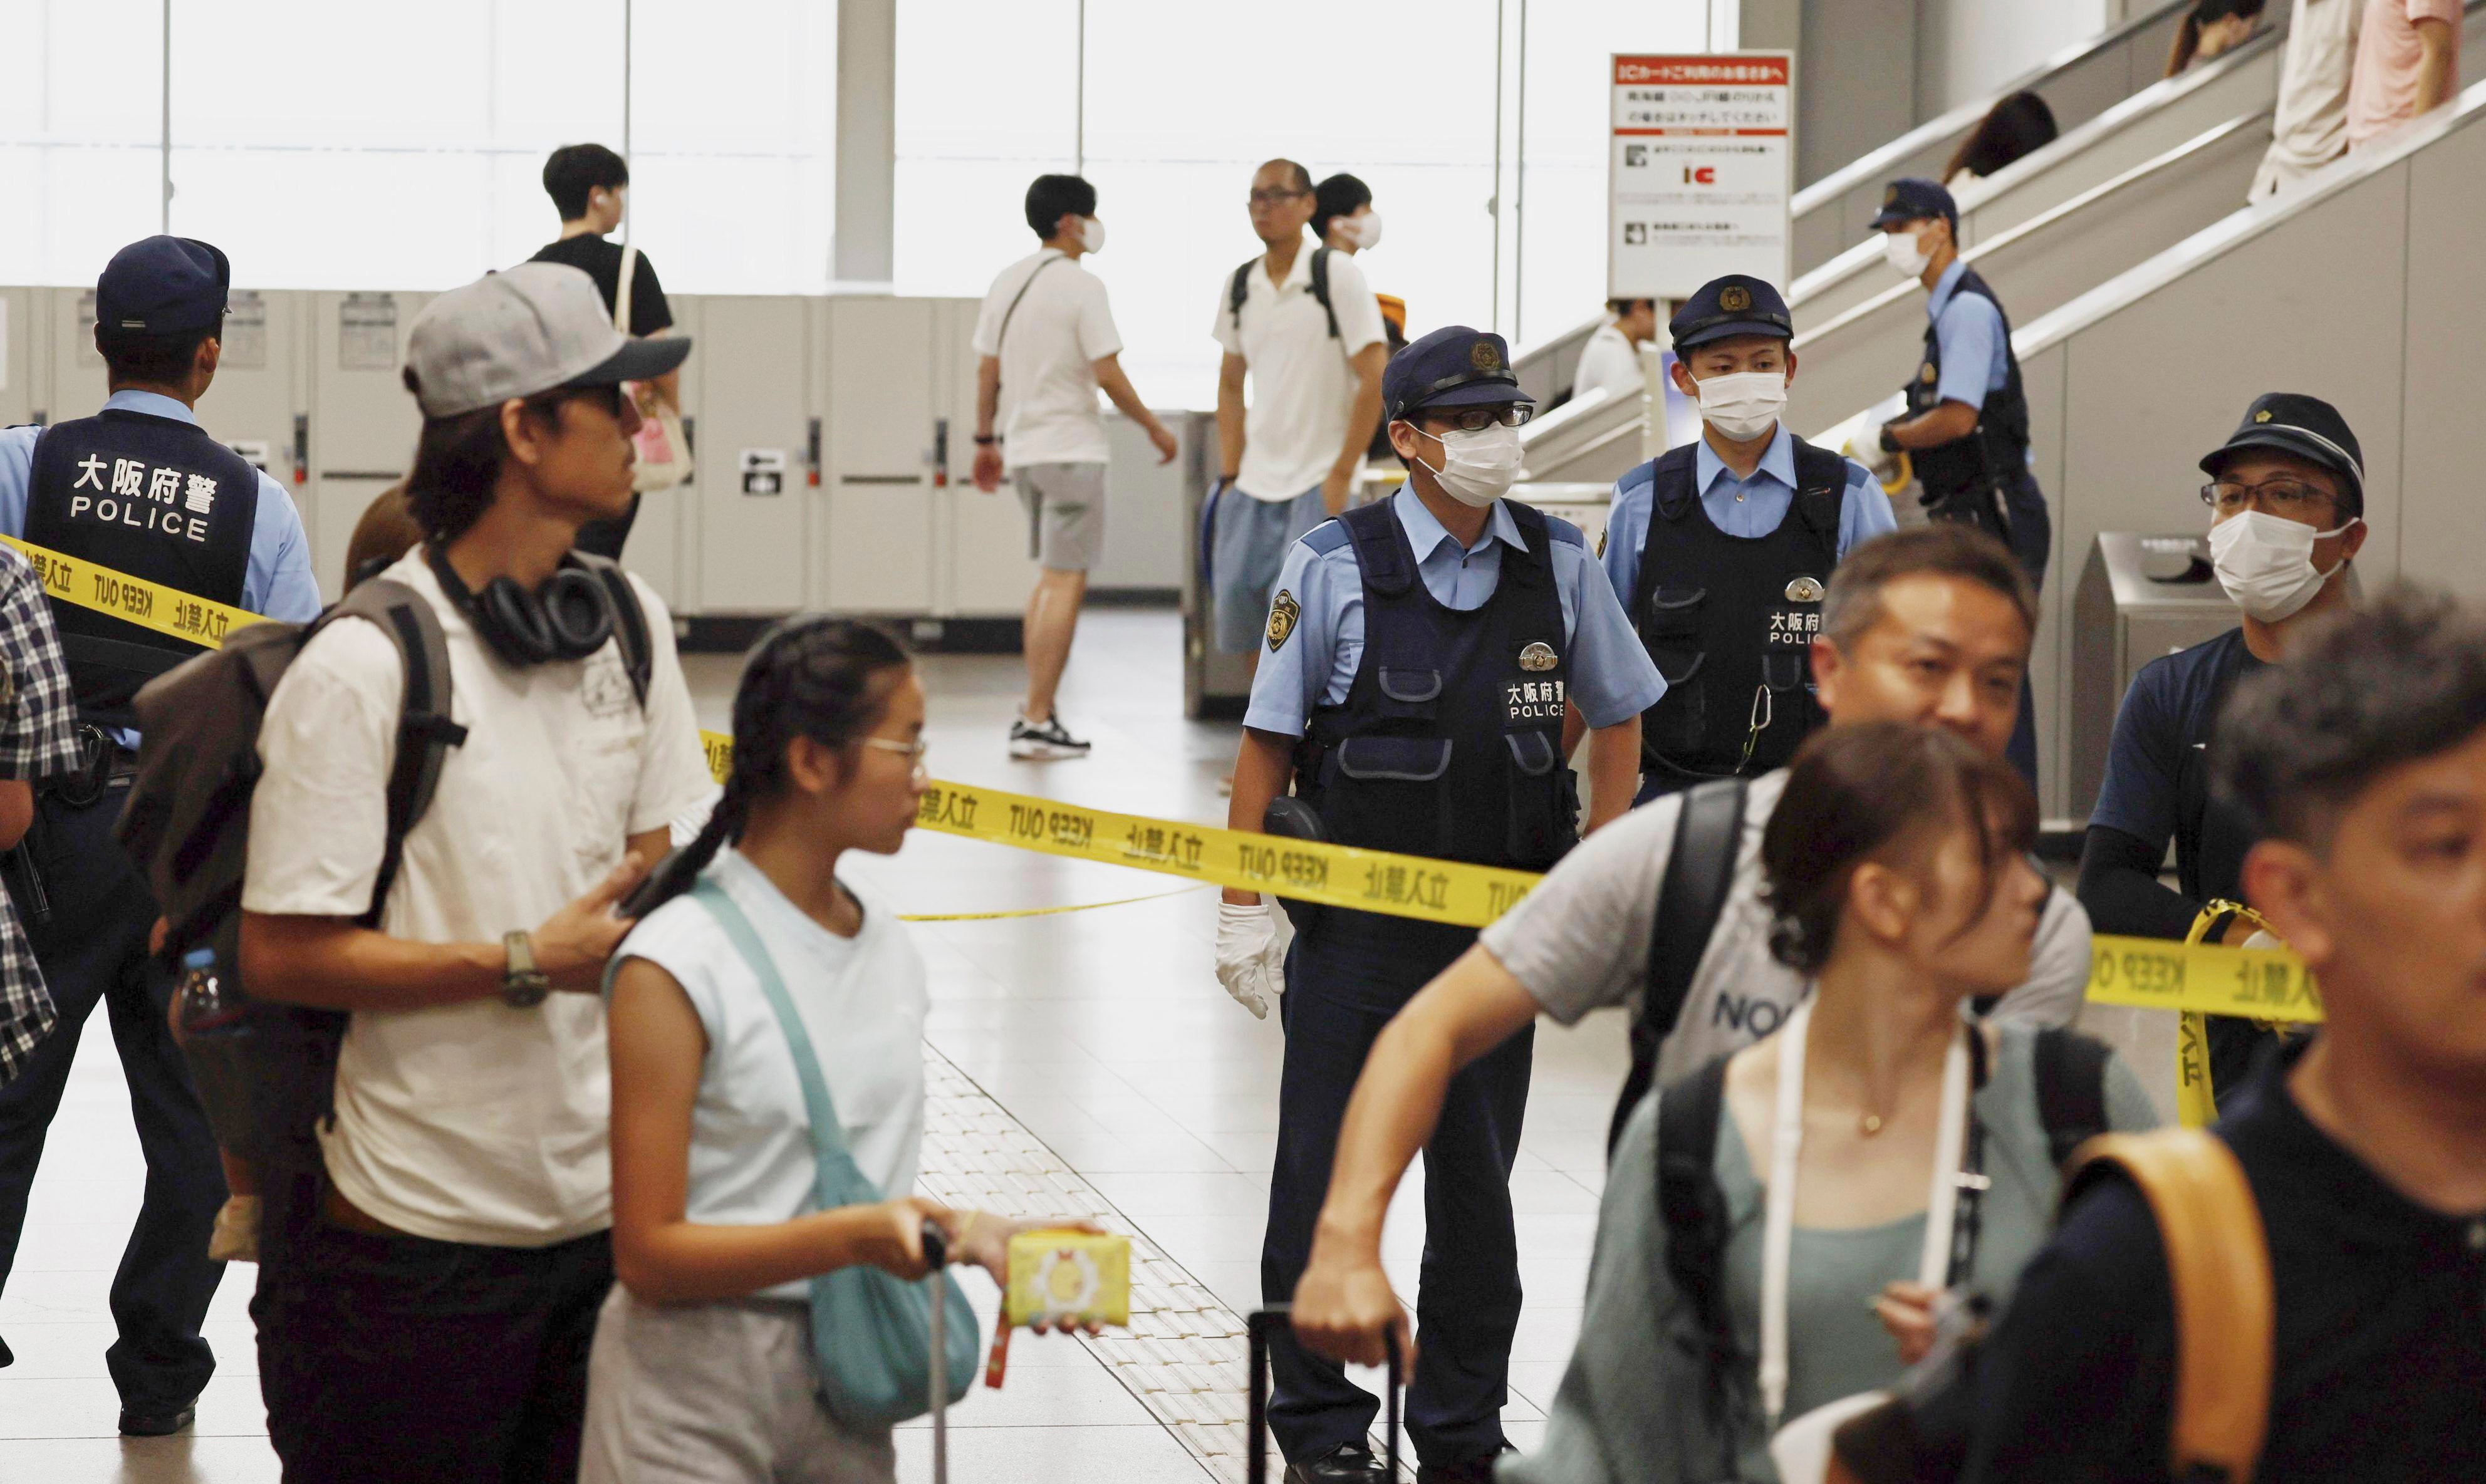 Japanese police officers patrol a train station after a man was arrested at the station in Izumisano, south of Osaka